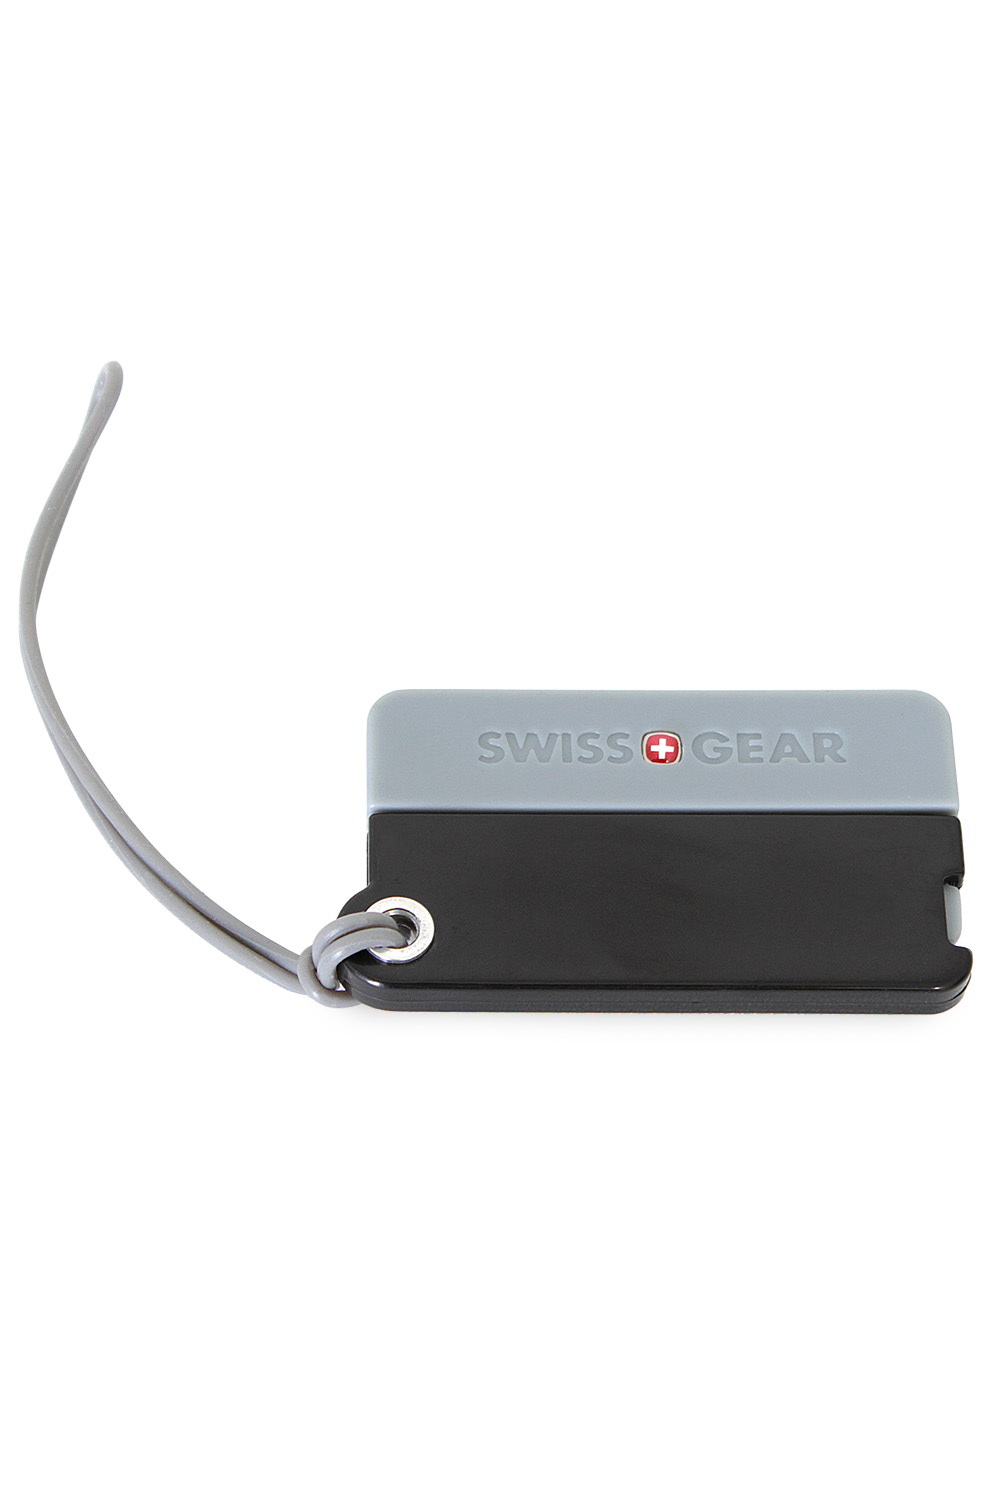 Designed Extra-large To Be Easily Spotted on Luggage Carousels Swiss Gear Jumbo Blue Luggage Tag 